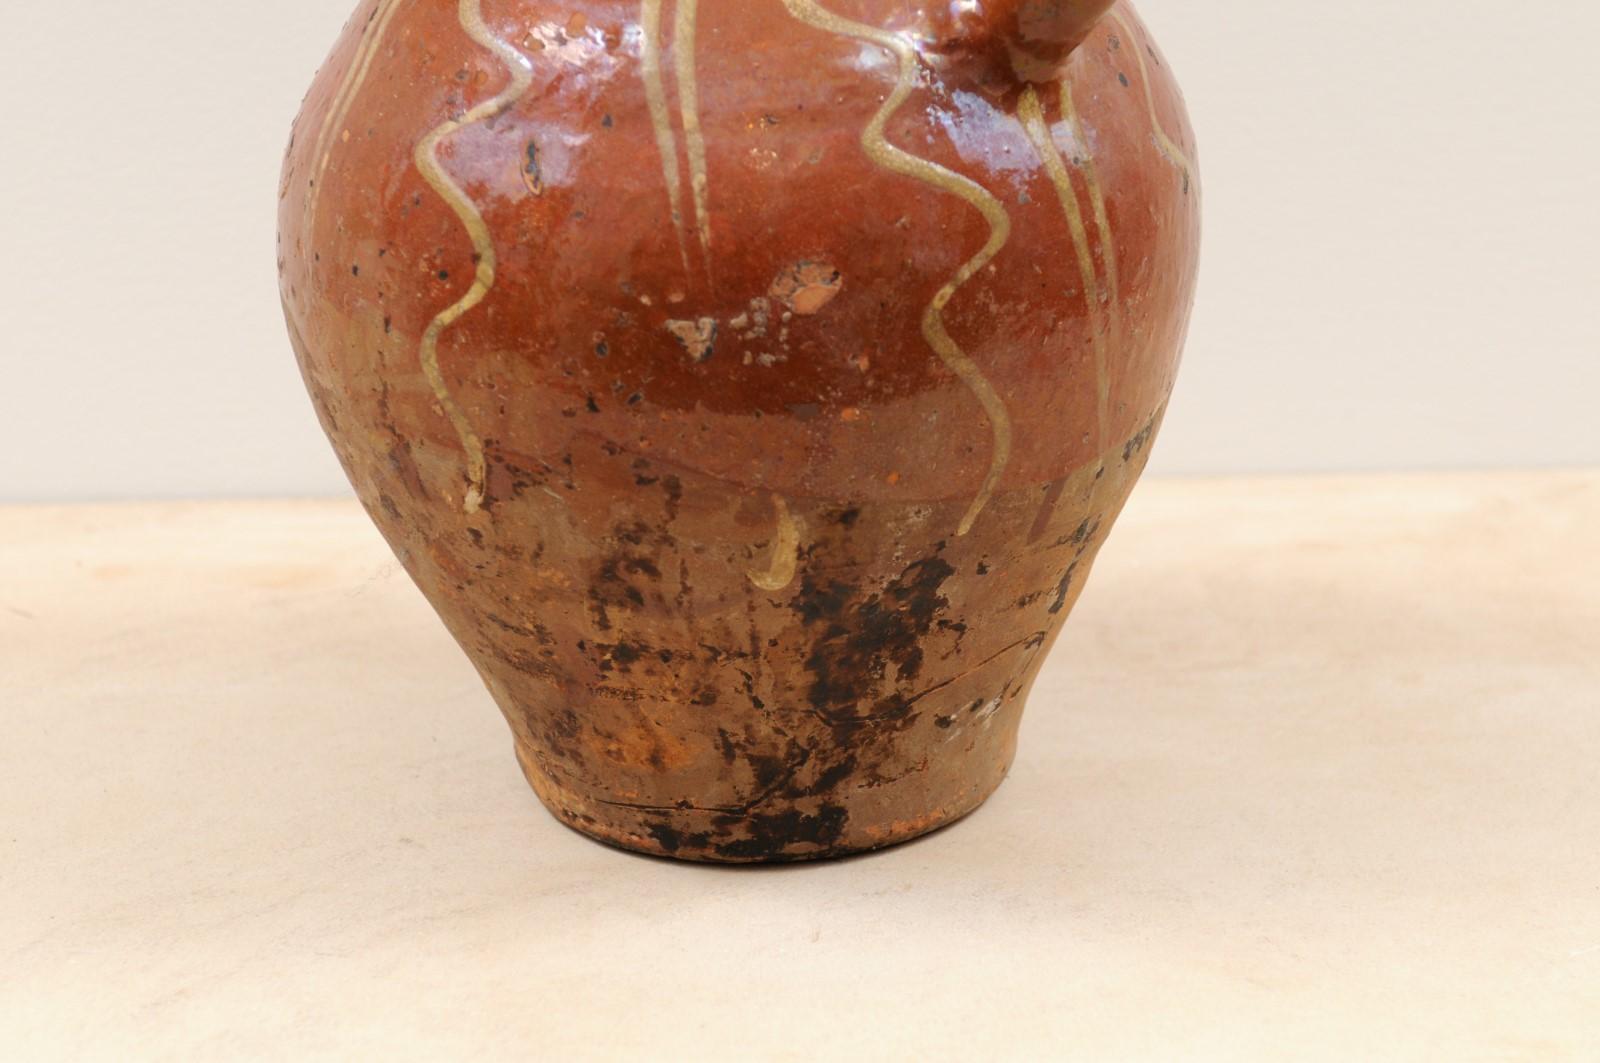 Rustic French Glazed Terracotta 19th Century Oil Jug with Distressed Appearance For Sale 1